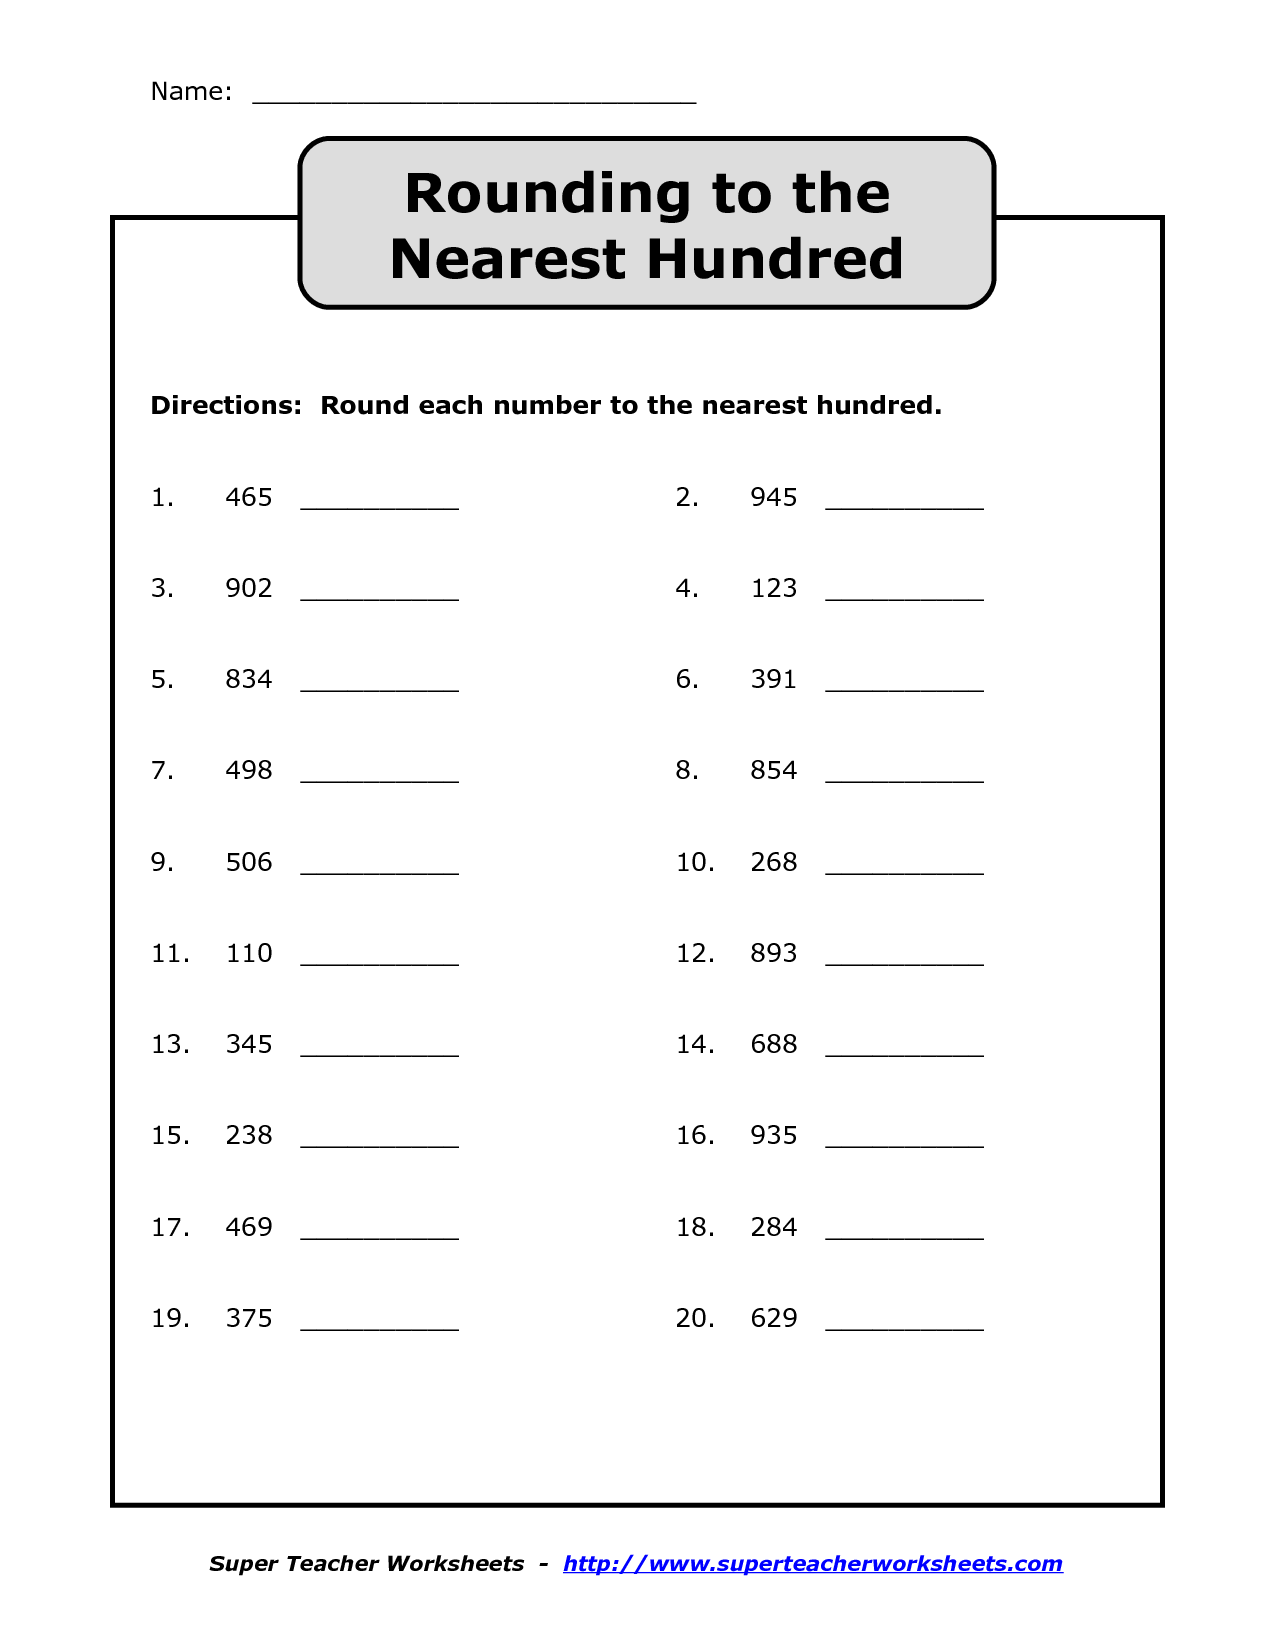 9-best-images-of-rounding-numbers-to-100-worksheets-rounding-numbers-worksheets-to-the-nearest